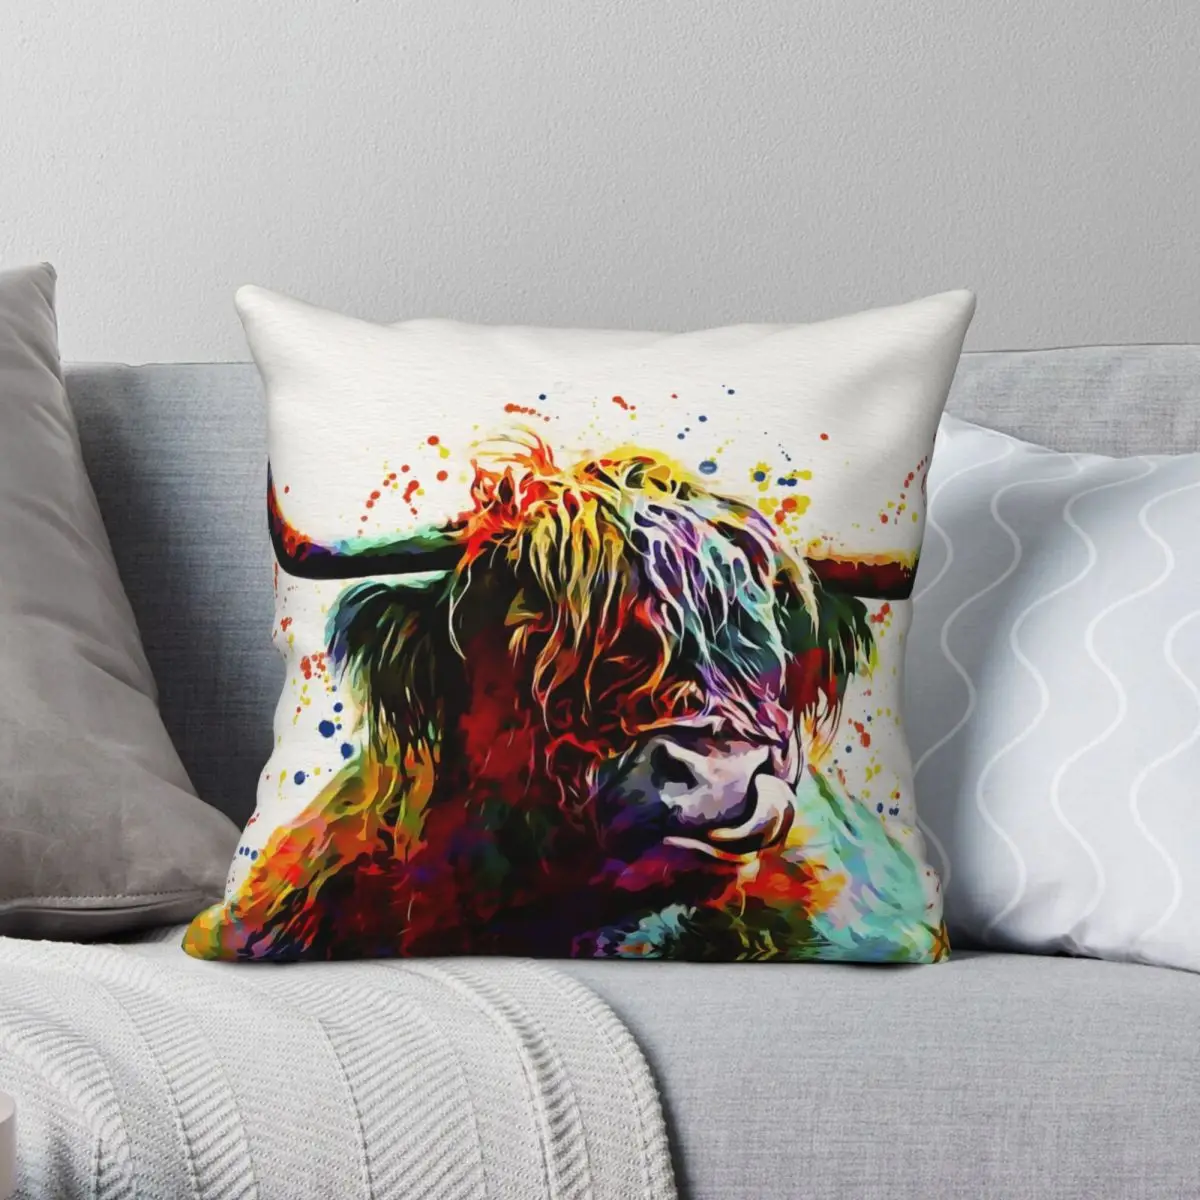 

Highland Cow Watercolor Square Pillowcase Polyester Linen Velvet Pattern Zip Decor Pillow Case Bed Cushion Cover